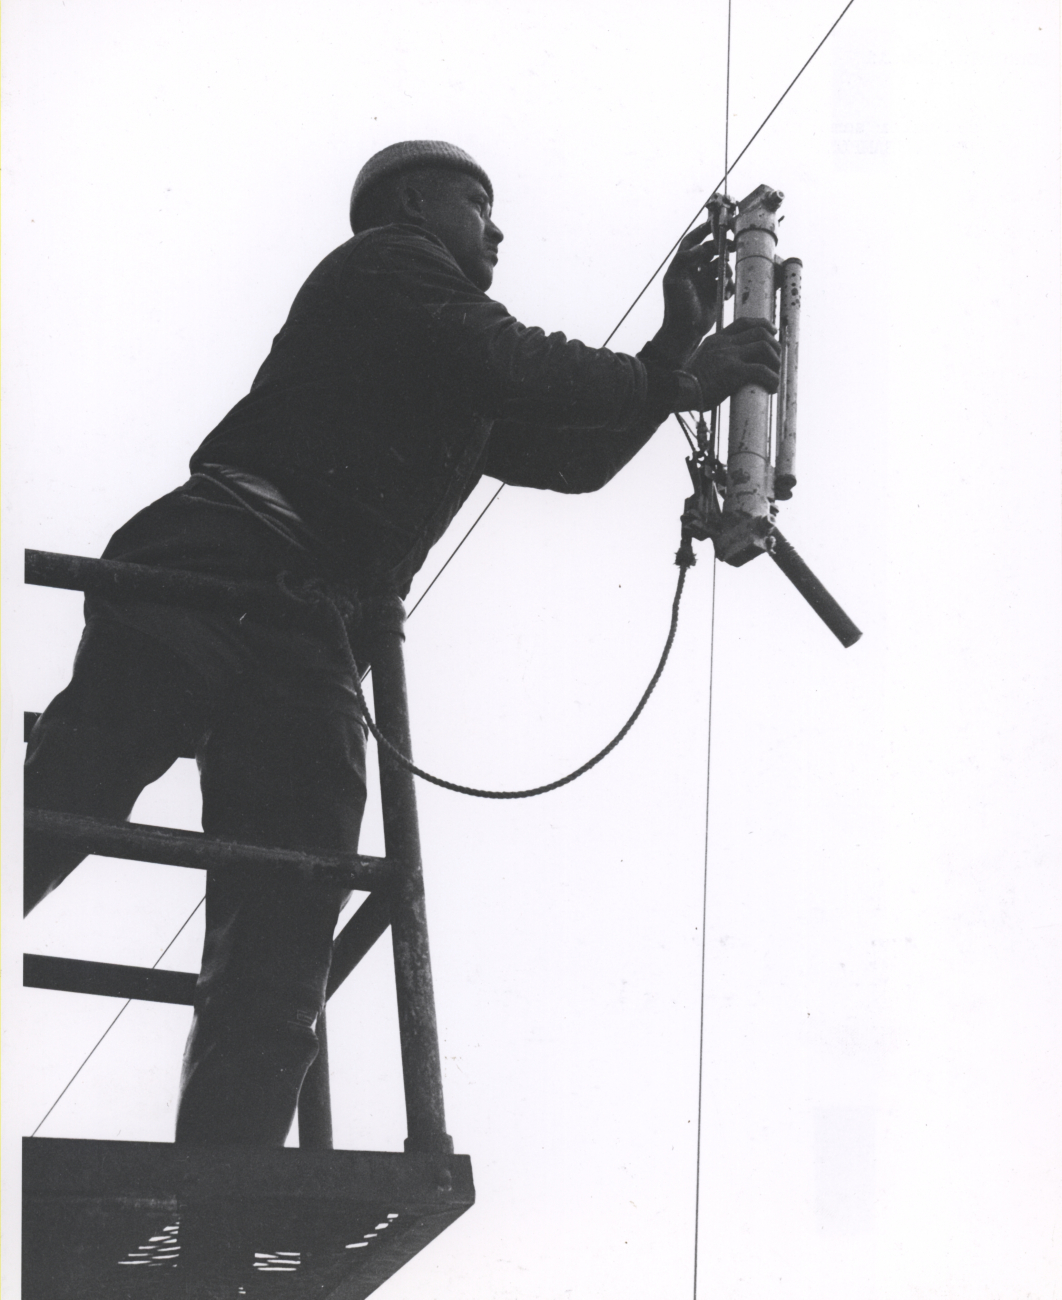 Deploying a Nansen bottle, used for measuring sub-surface temperature andto collect water samples for analysis